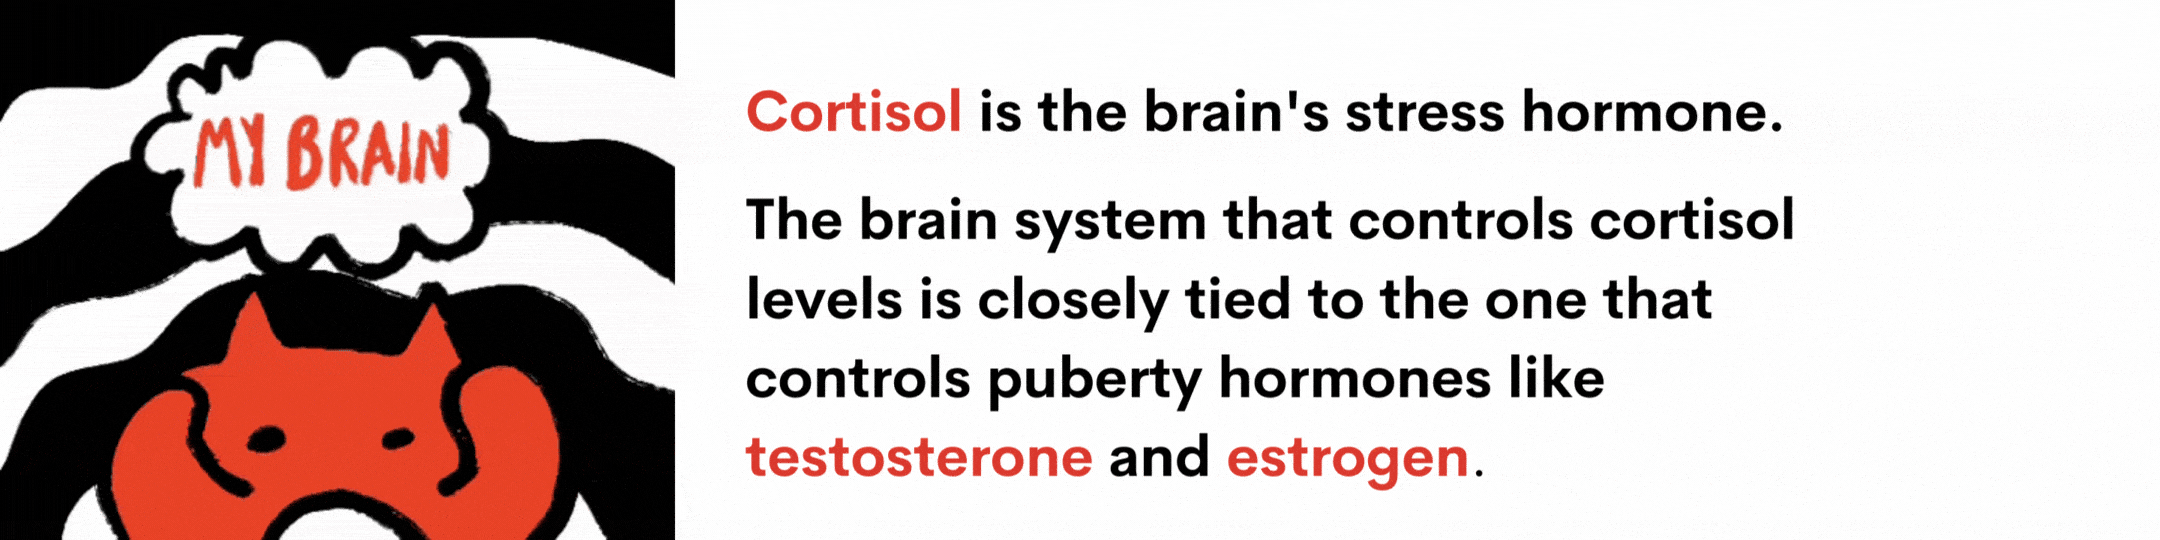 Cortisol is the brain's stress hormone. The brain system that controls cortisol levels is closely tied to the brain system that controls puberty hormones like testosterone and estrogen.